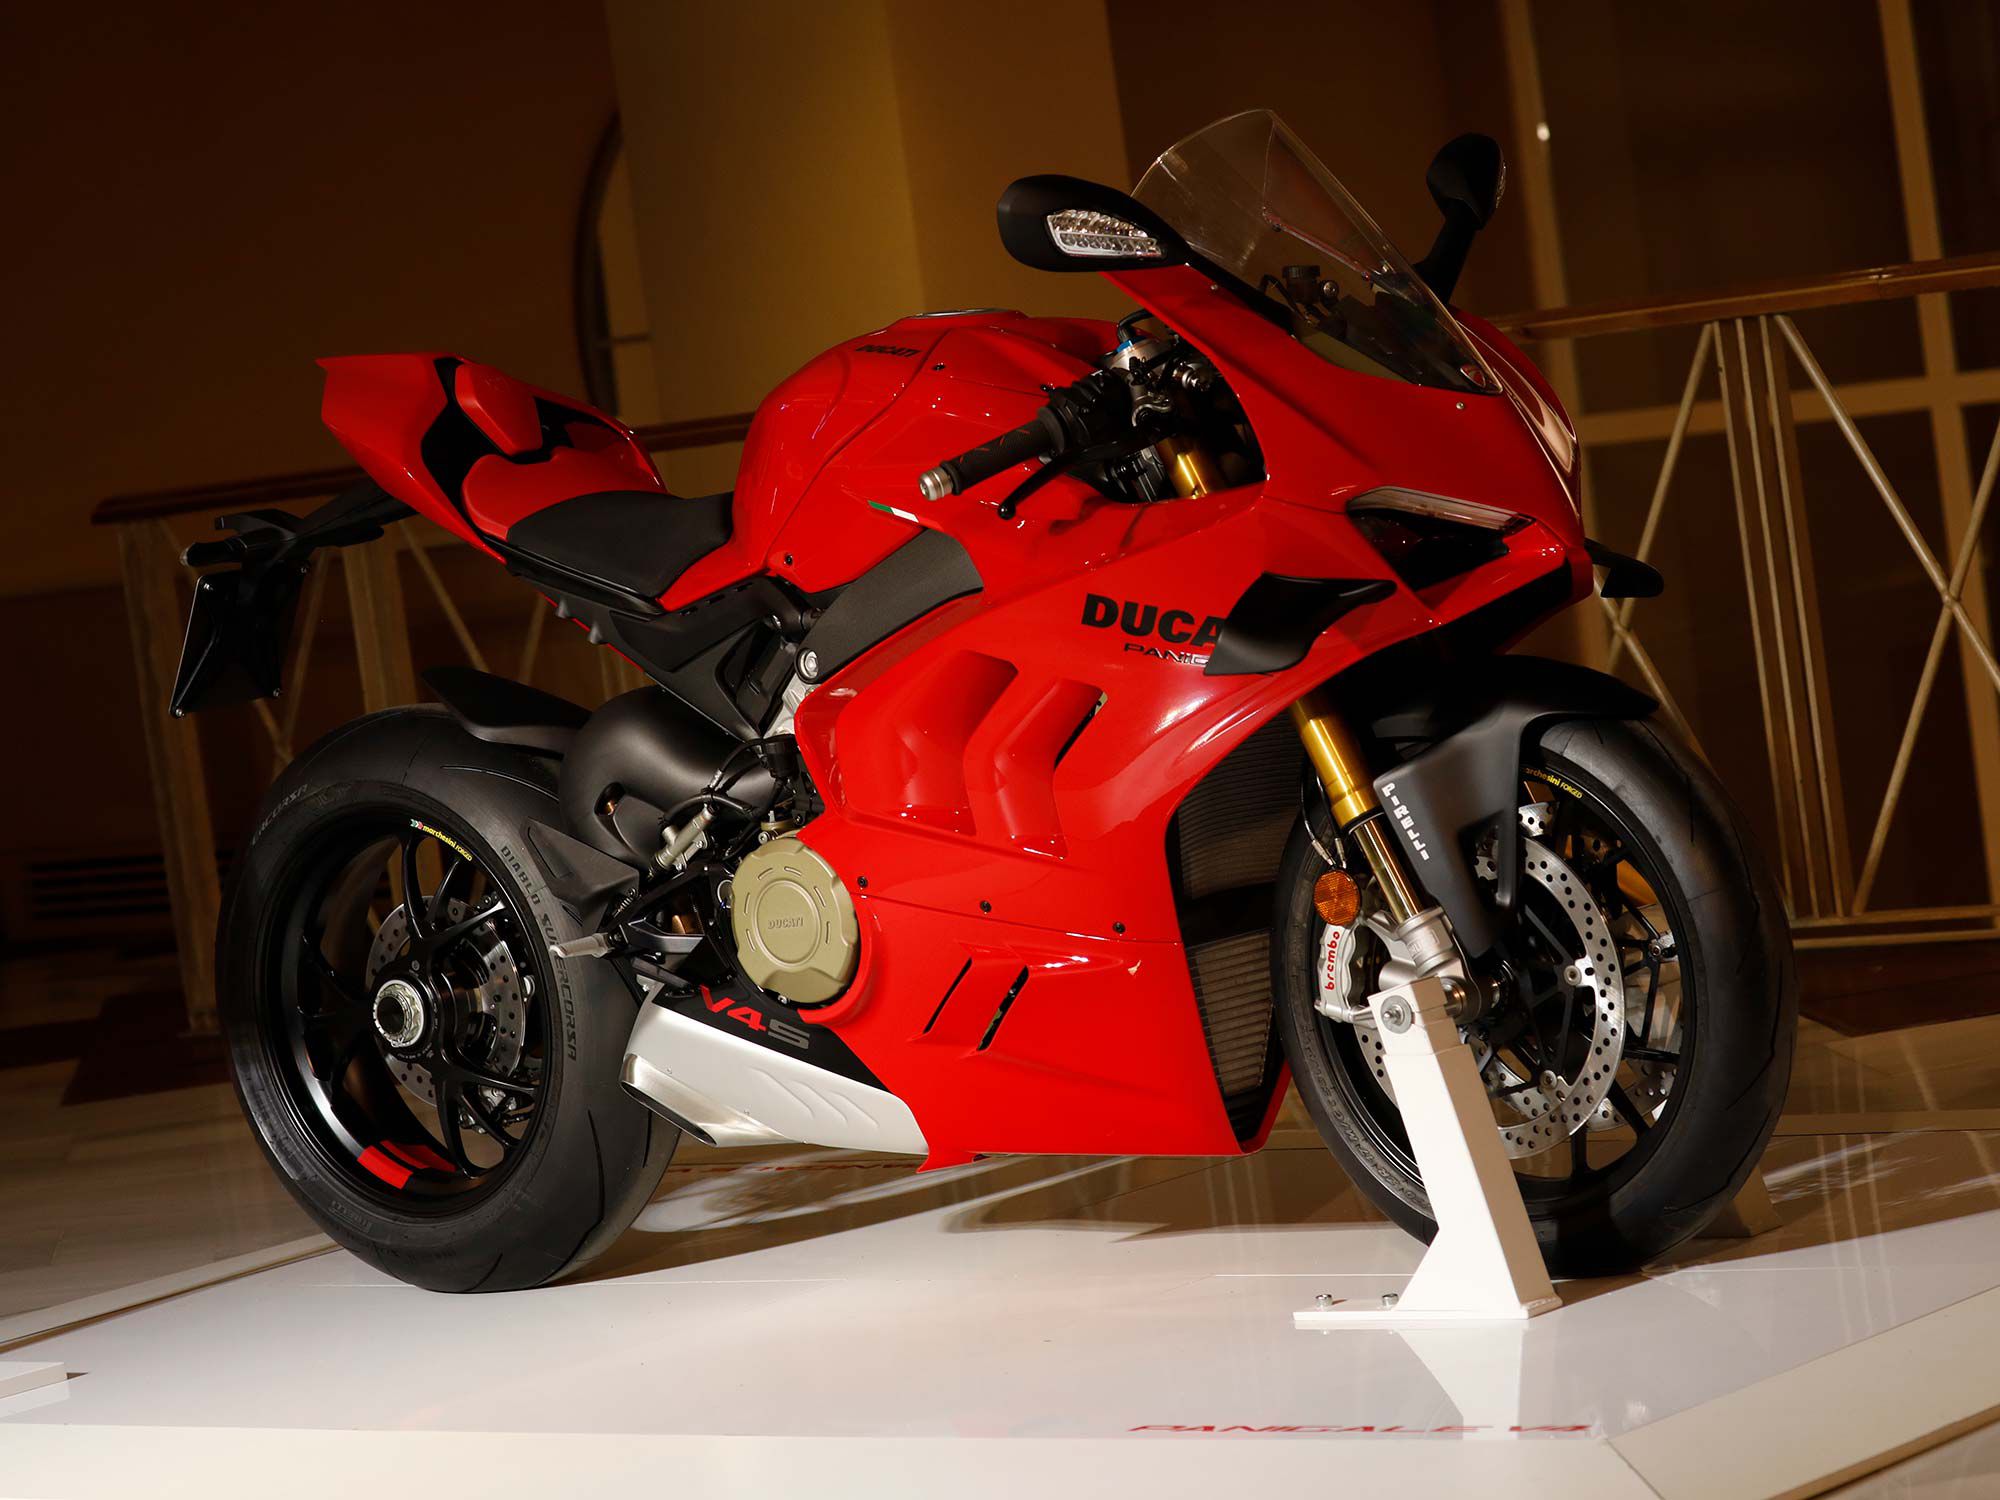 Ducati unveils an improved Panigale V4 S superbike for 2022.